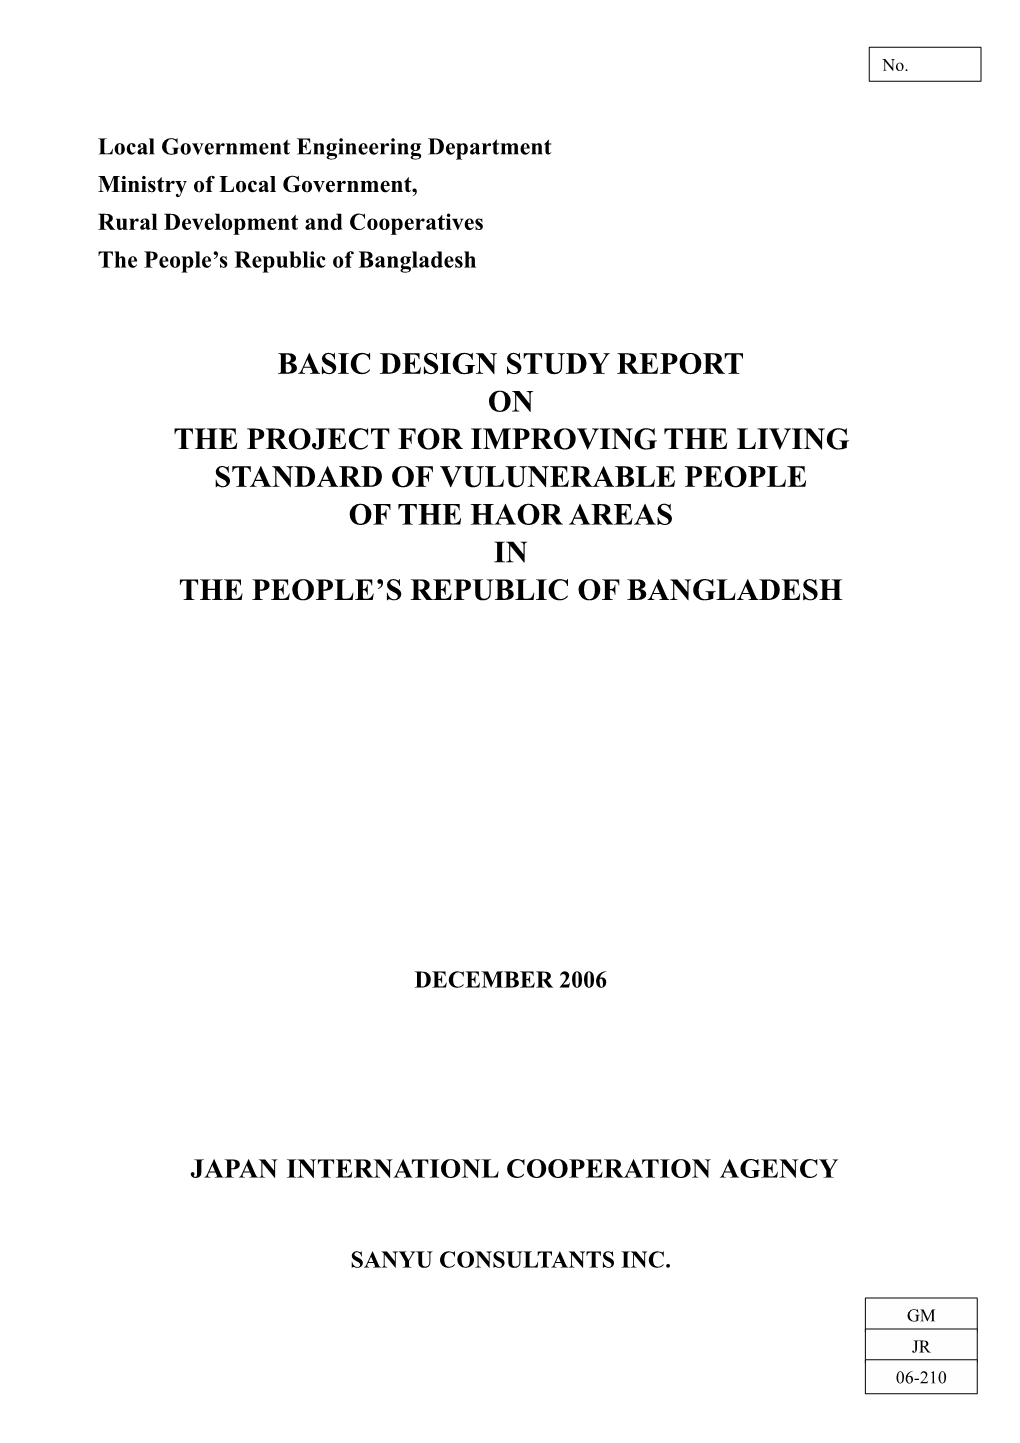 Basic Design Study Report on the Project for Improving the Living Standard of Vulunerable People of the Haor Areas in the People’S Republic of Bangladesh